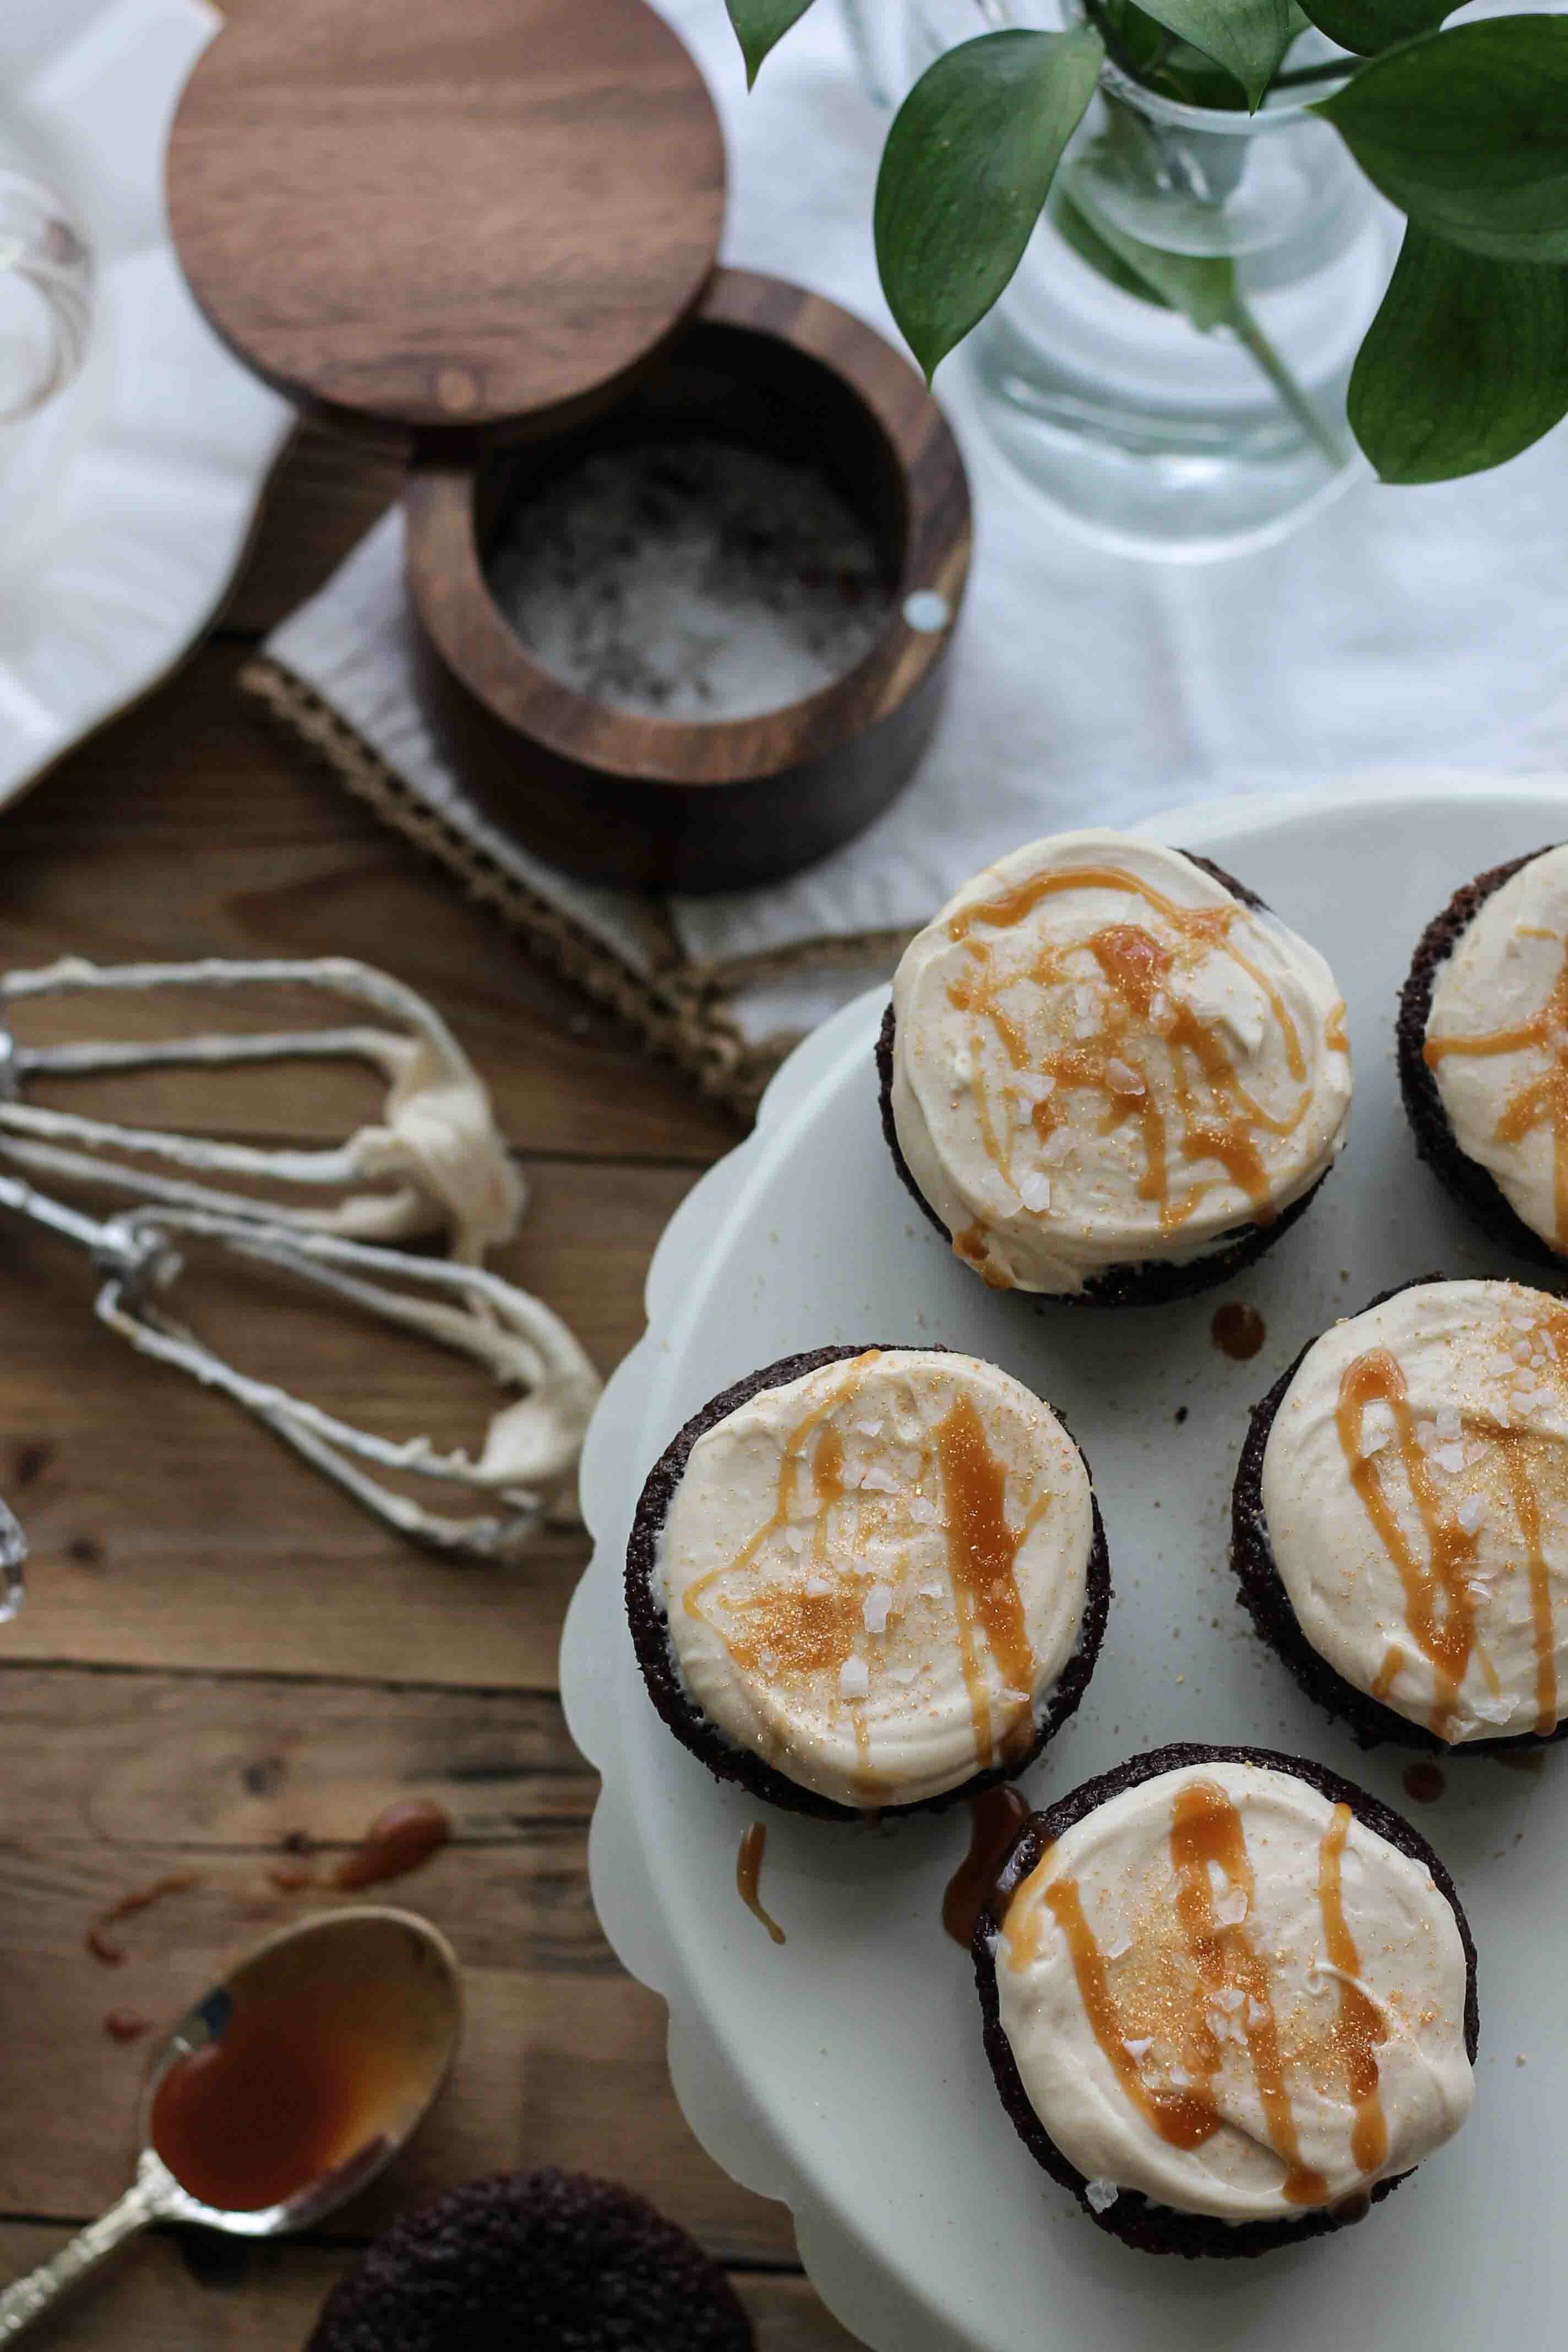 Chocolate & Ale Cupcakes with Salted Caramel Frosting {Pedantic Foodie}